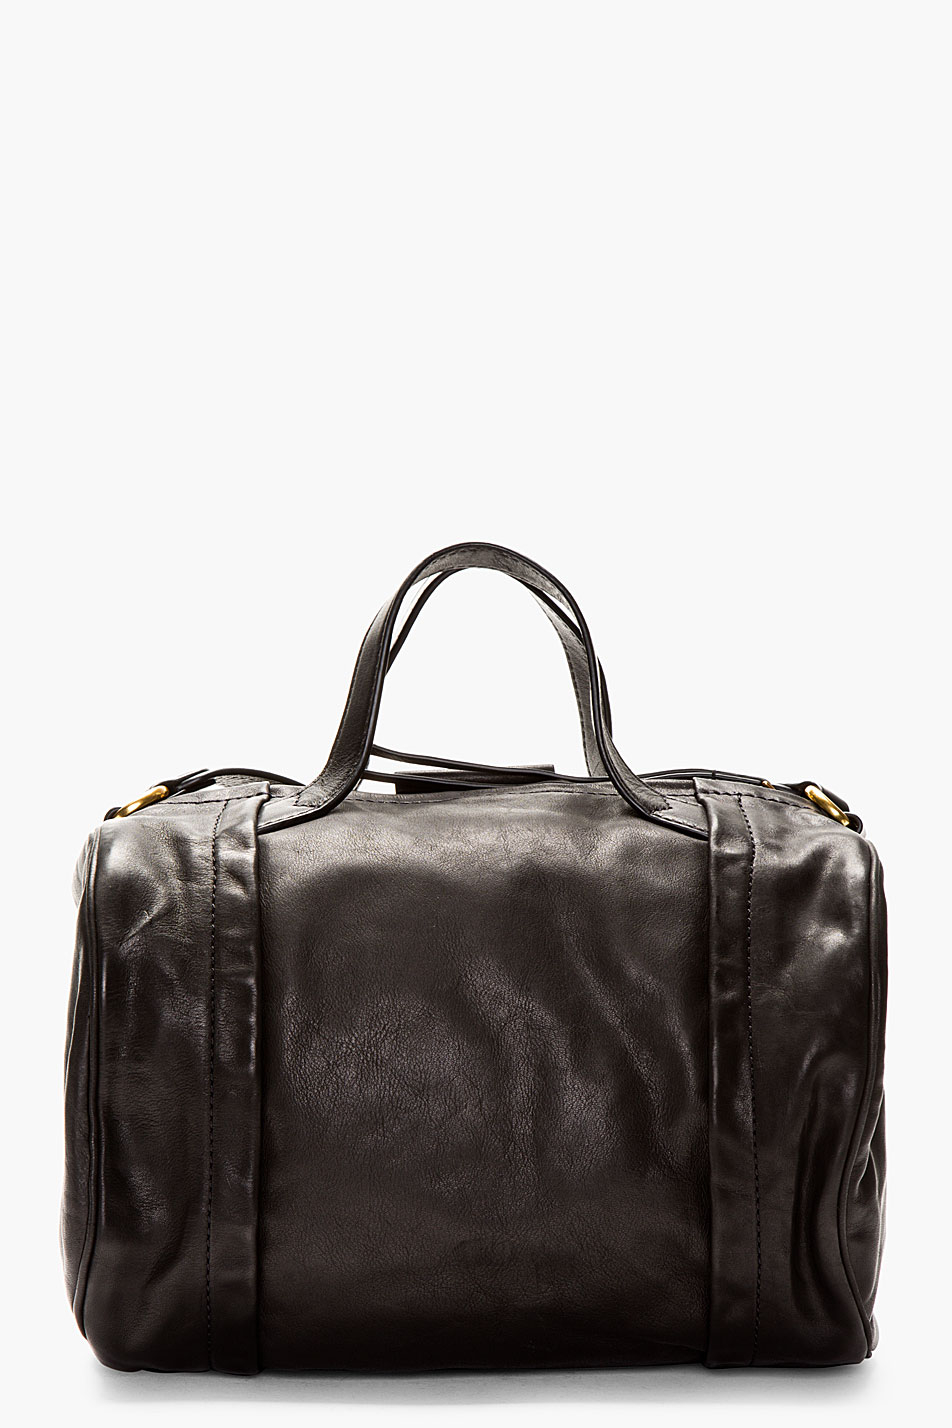 Marc By Marc Jacobs Black Leather Moto Duffle Bag in Black | Lyst